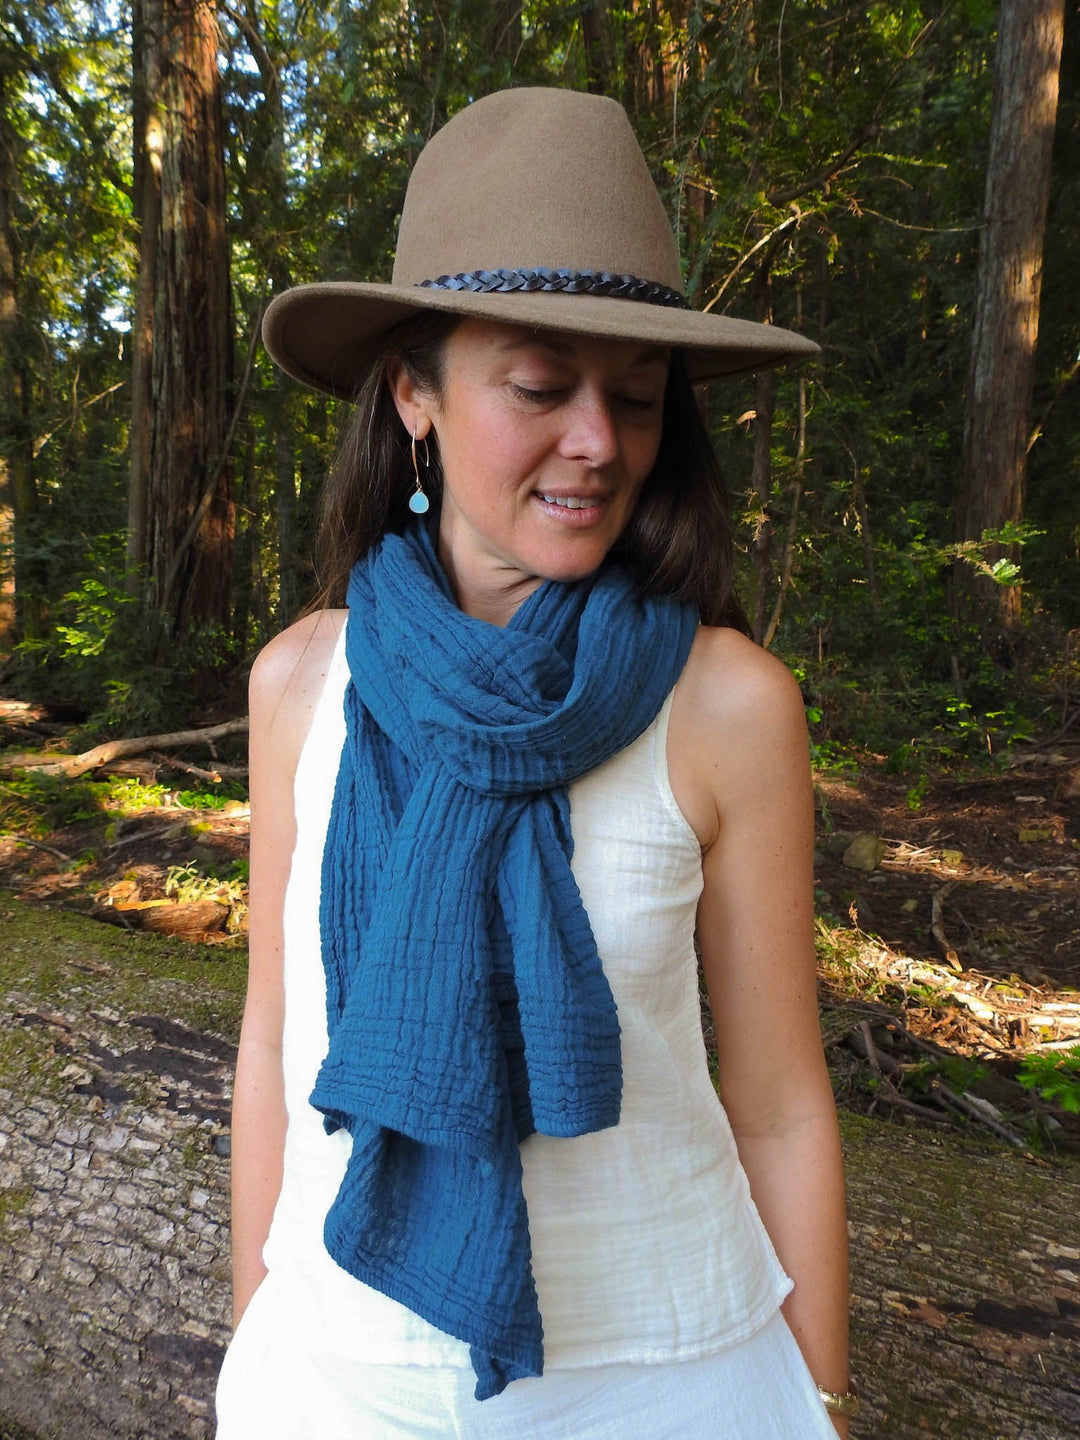 Female model has a blue scarf tied around neck of her white tank top.